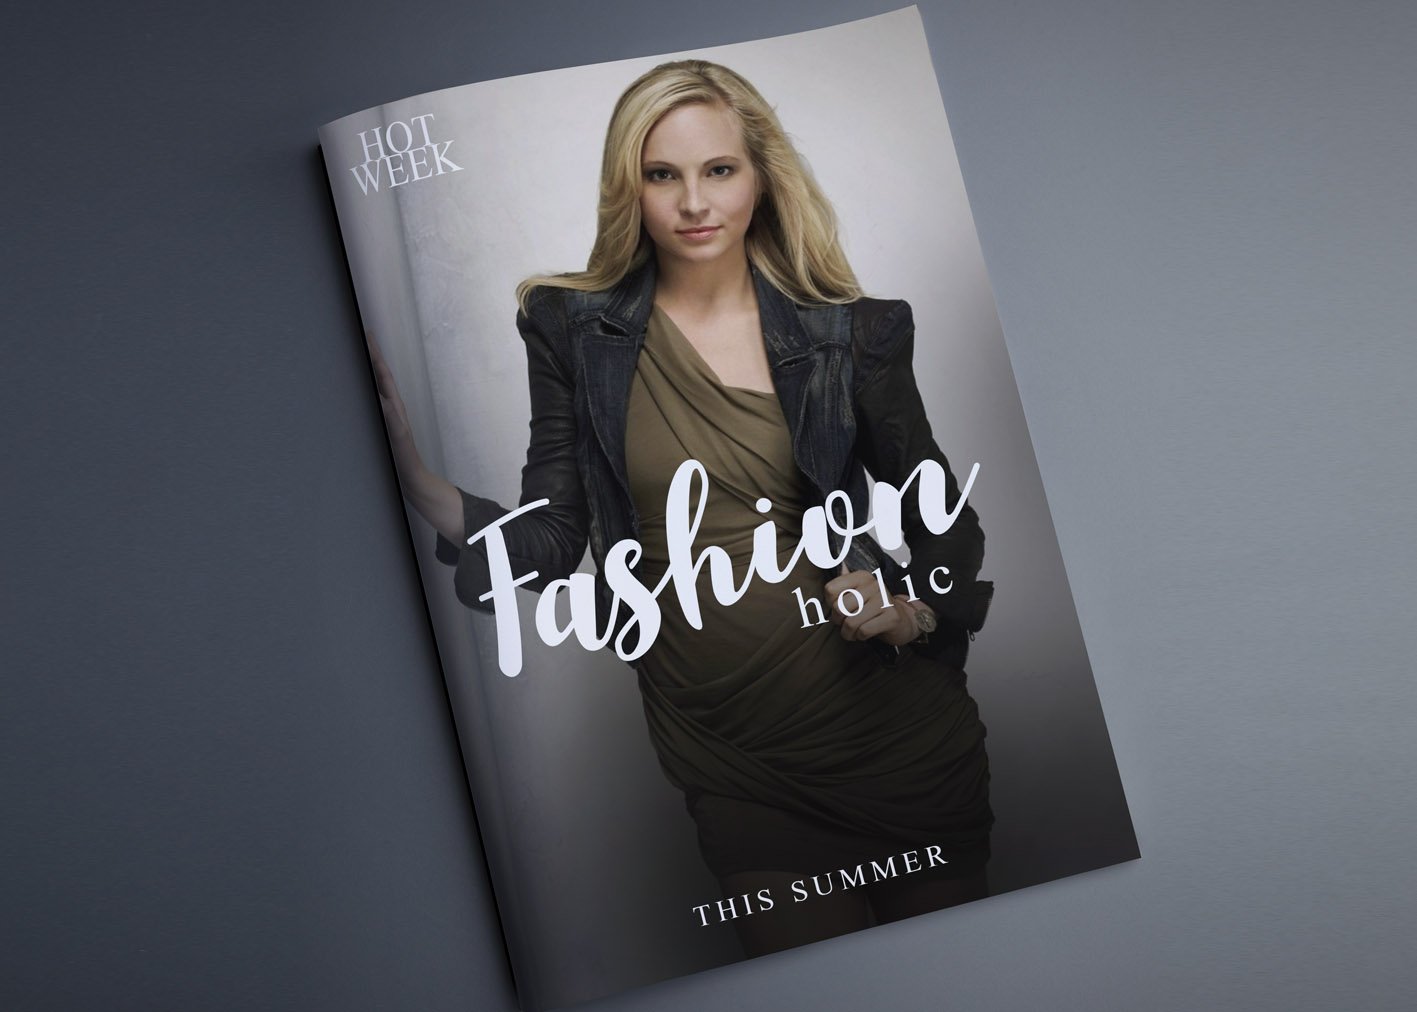 A beautiful and readable font that looks cool on fashion magazines.